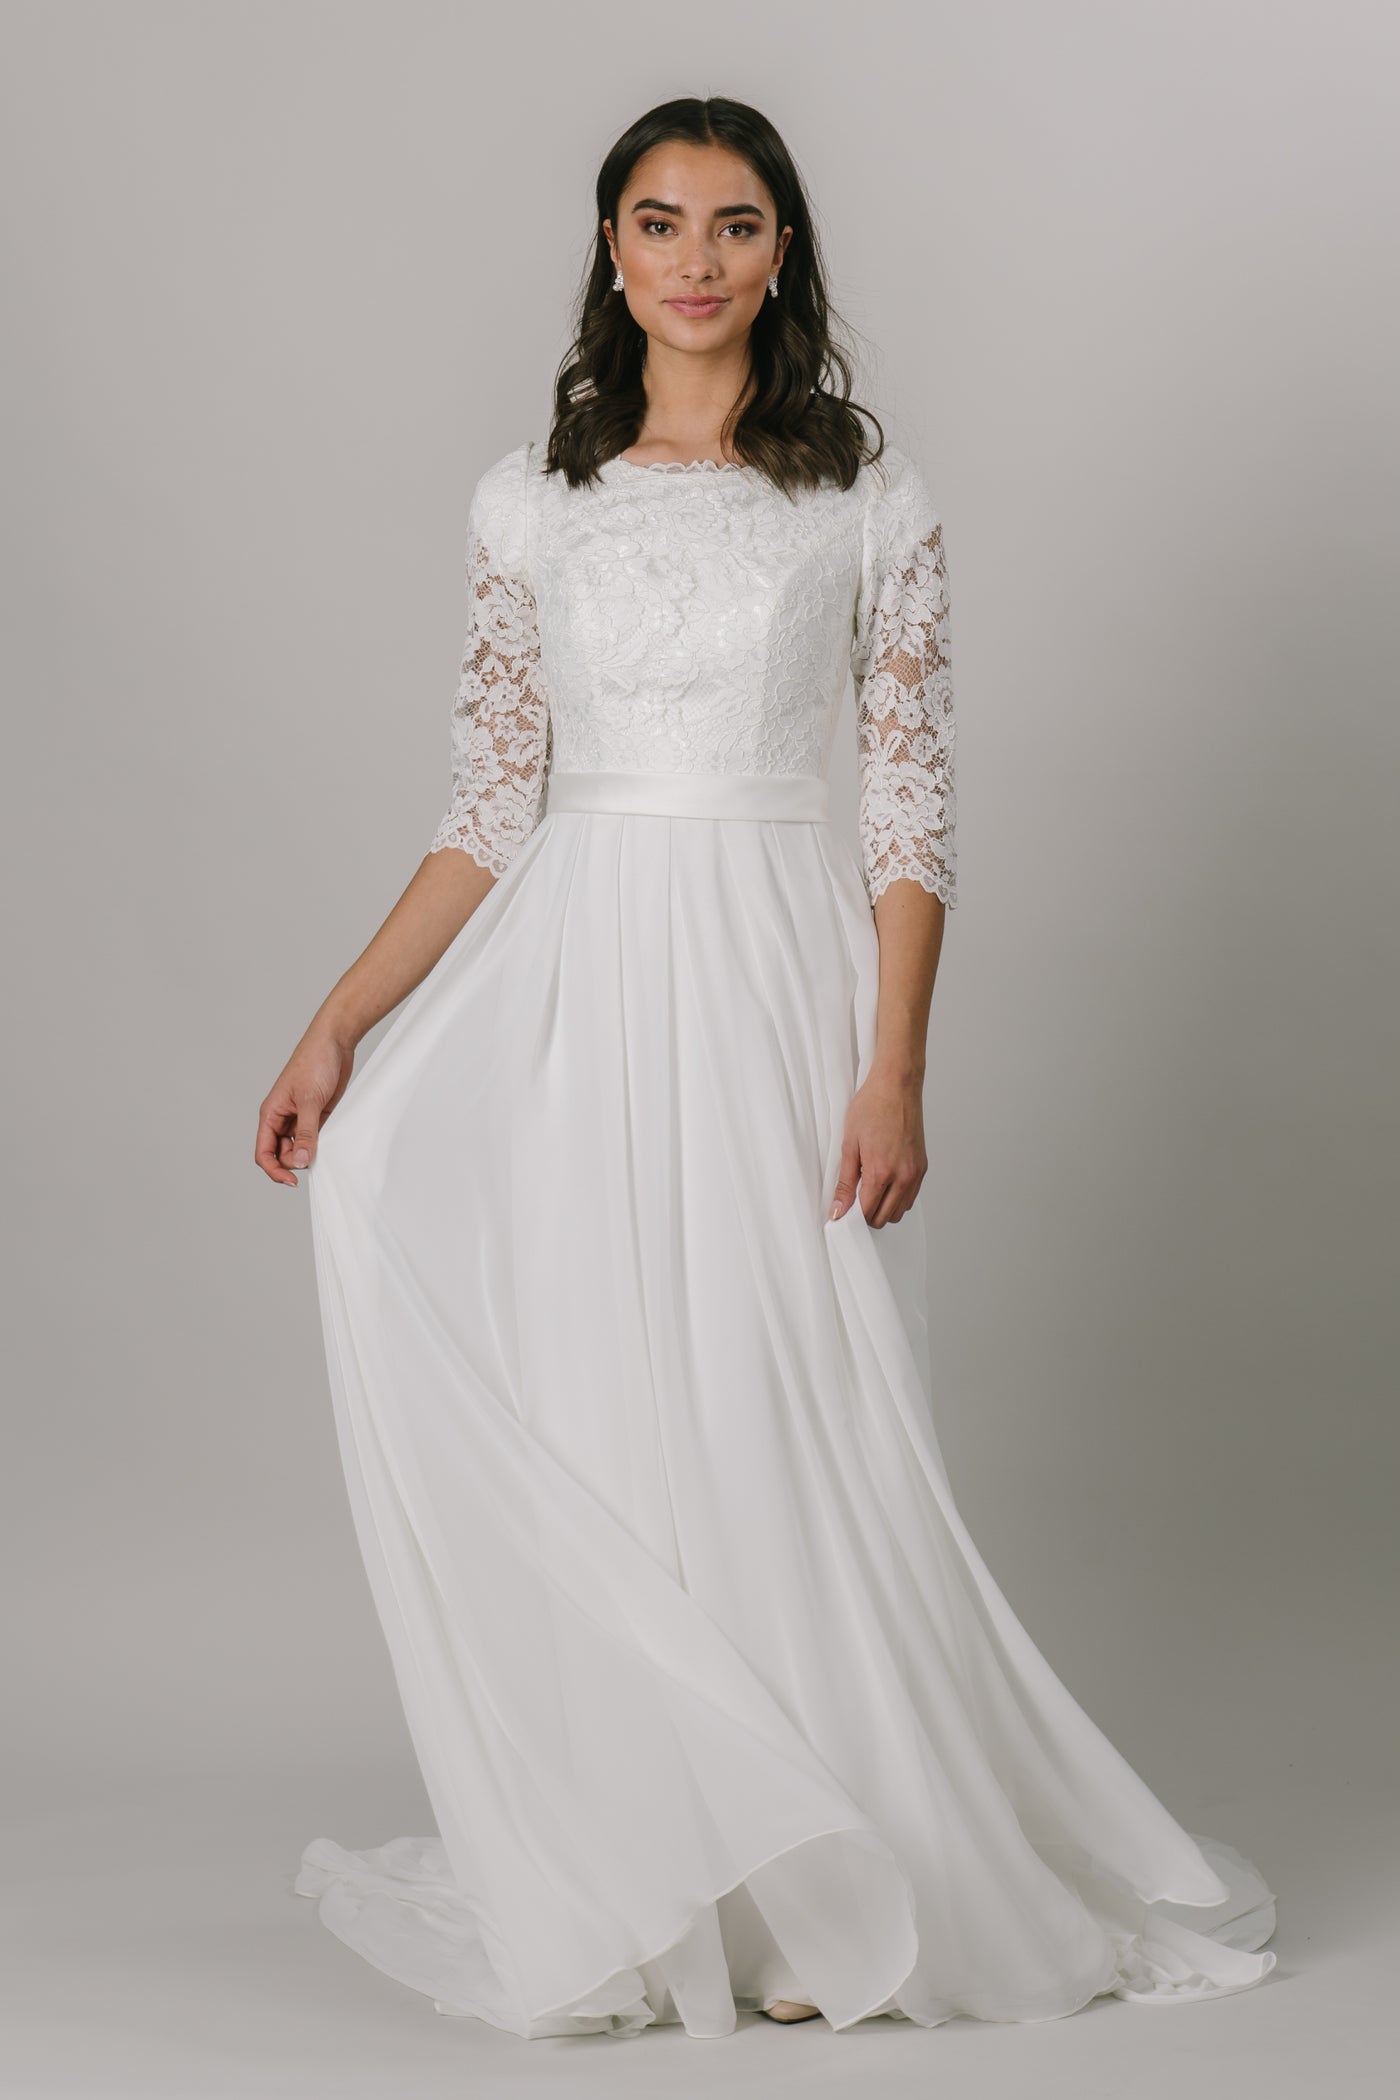 This classic modest wedding dress has everything you could want! Lace top, simple bottom, with 3/4 sleeve! The illusion sleeves, flattering waistband, and the pleated chiffon skirt make for the perfect dress. Almost a long sleeve with 3/4 sleeves. The gown is shown in ivory but is also available in white. Plus size available in the store.  Style Love: This gown has the perfect mix of everything! It's so flattering on everyone, and at this price, it's a total steal! 